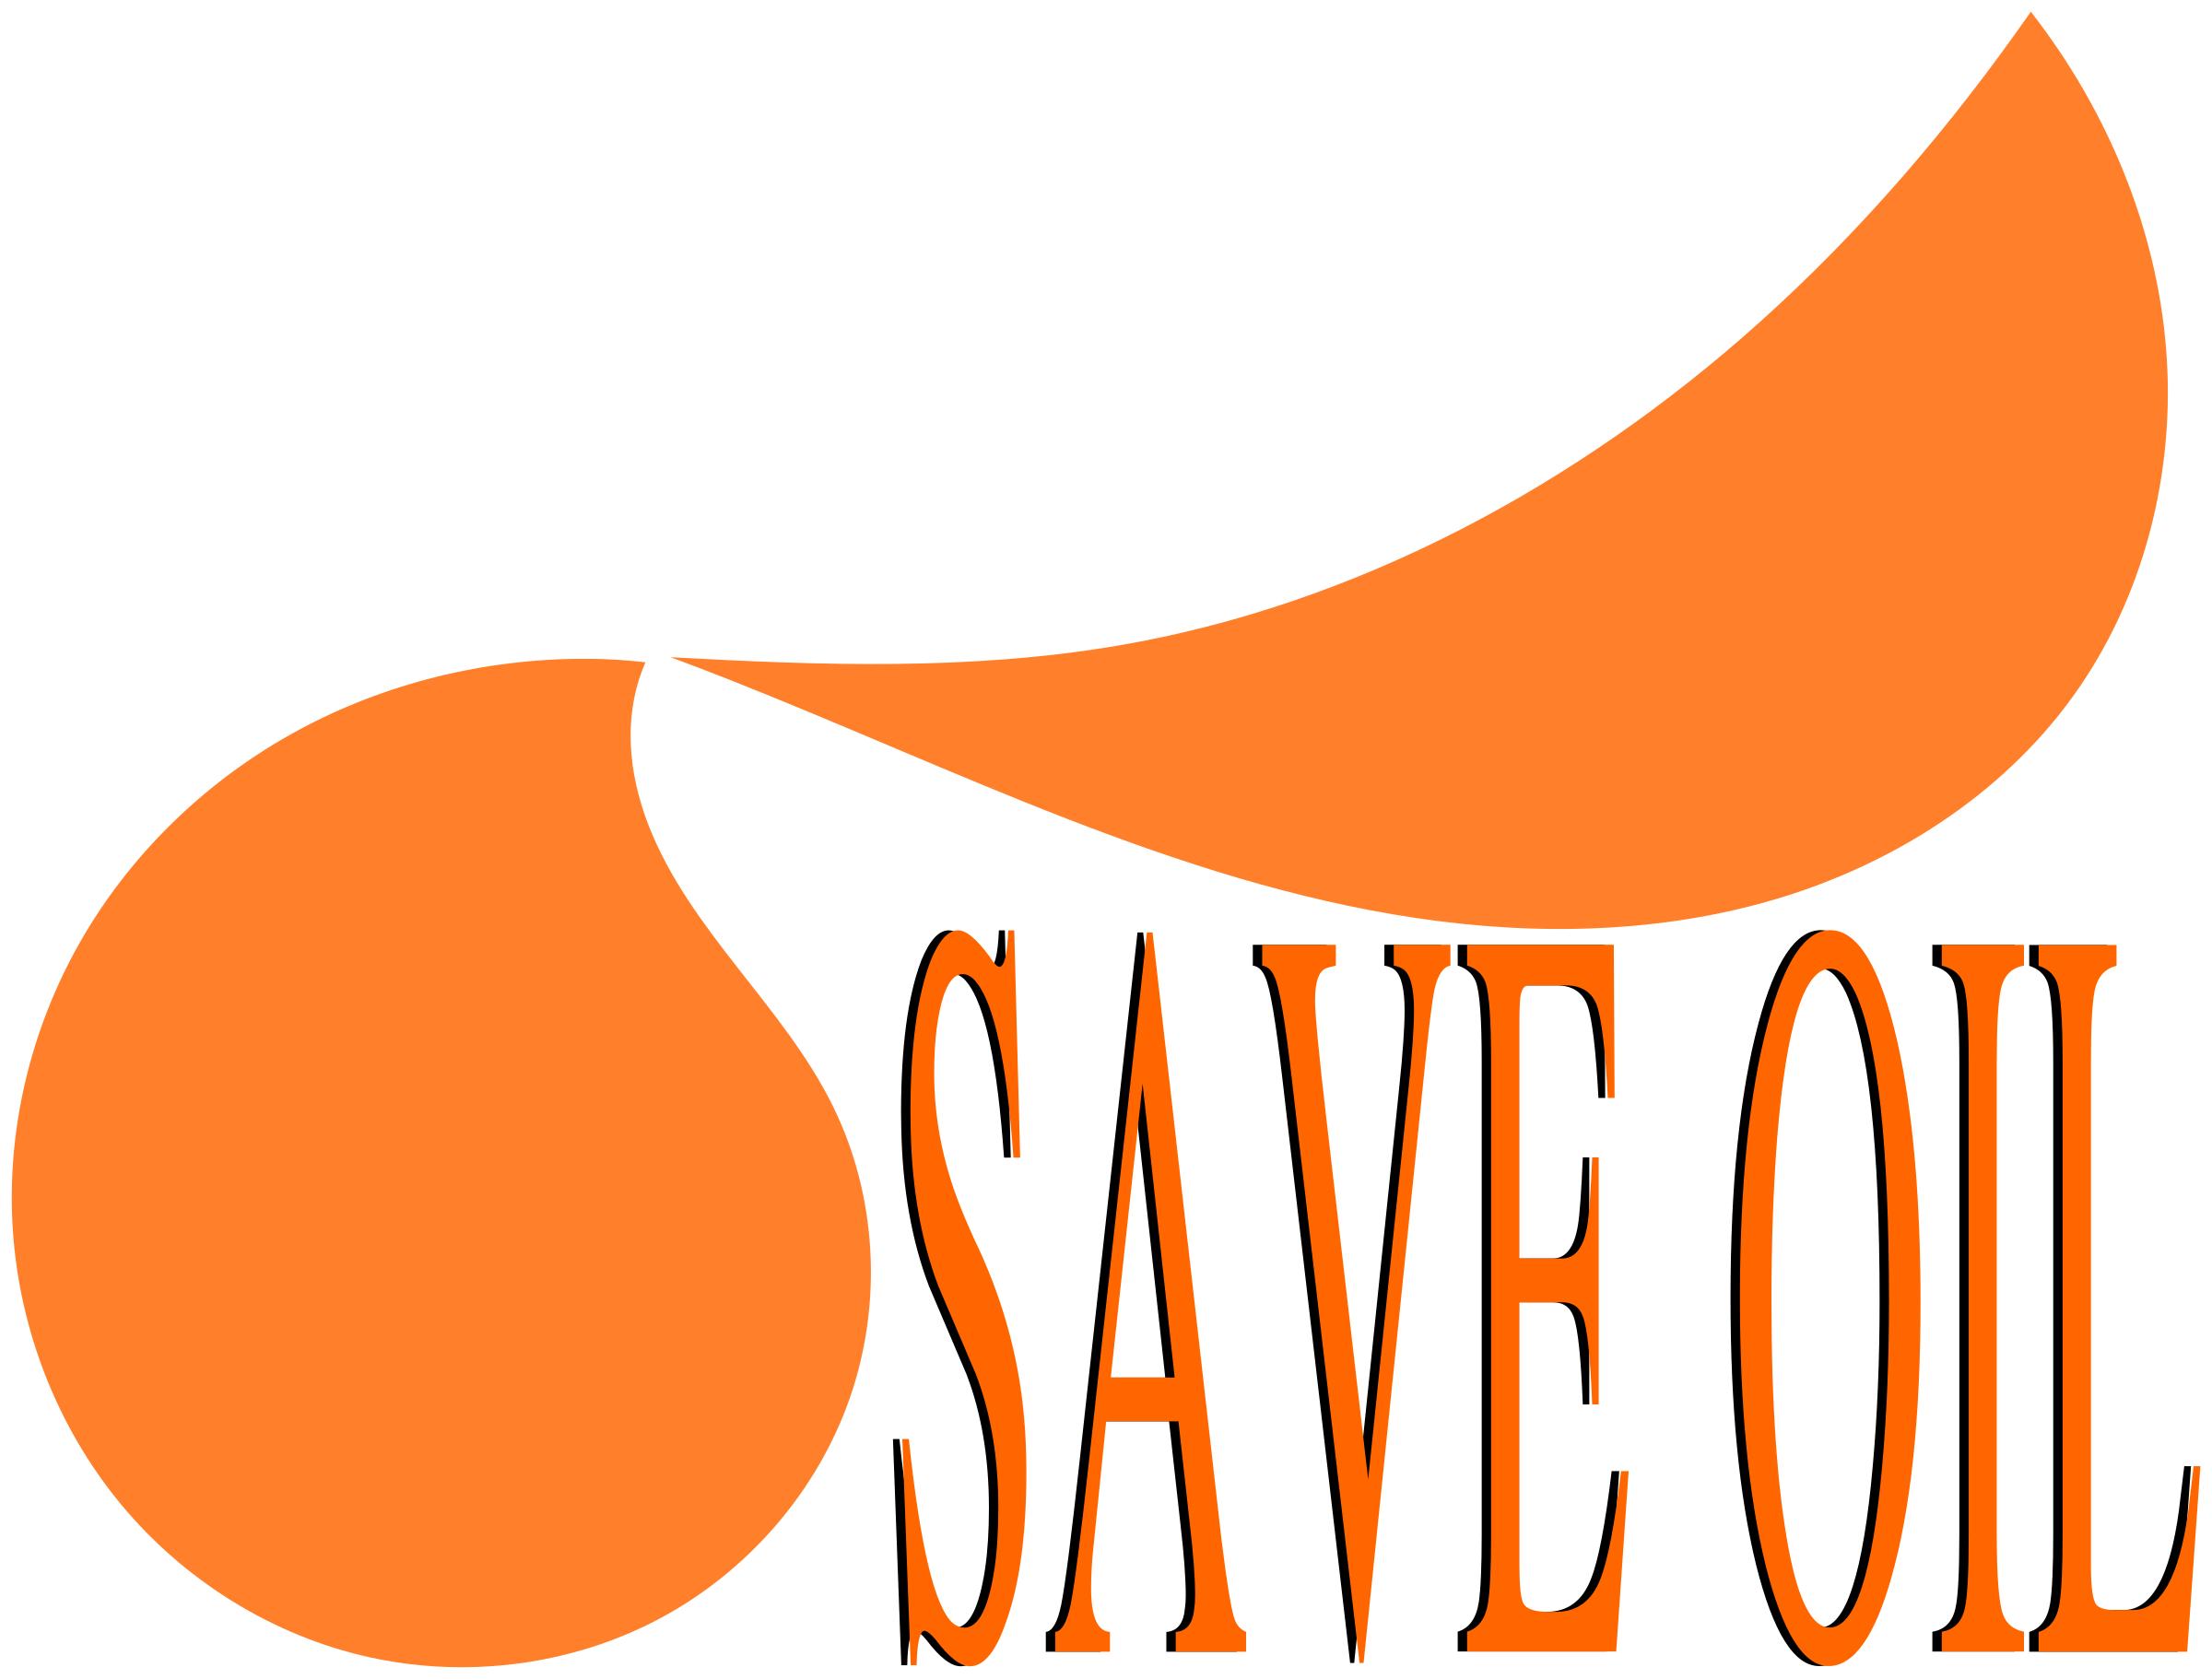 Save OIL - Message with logo png